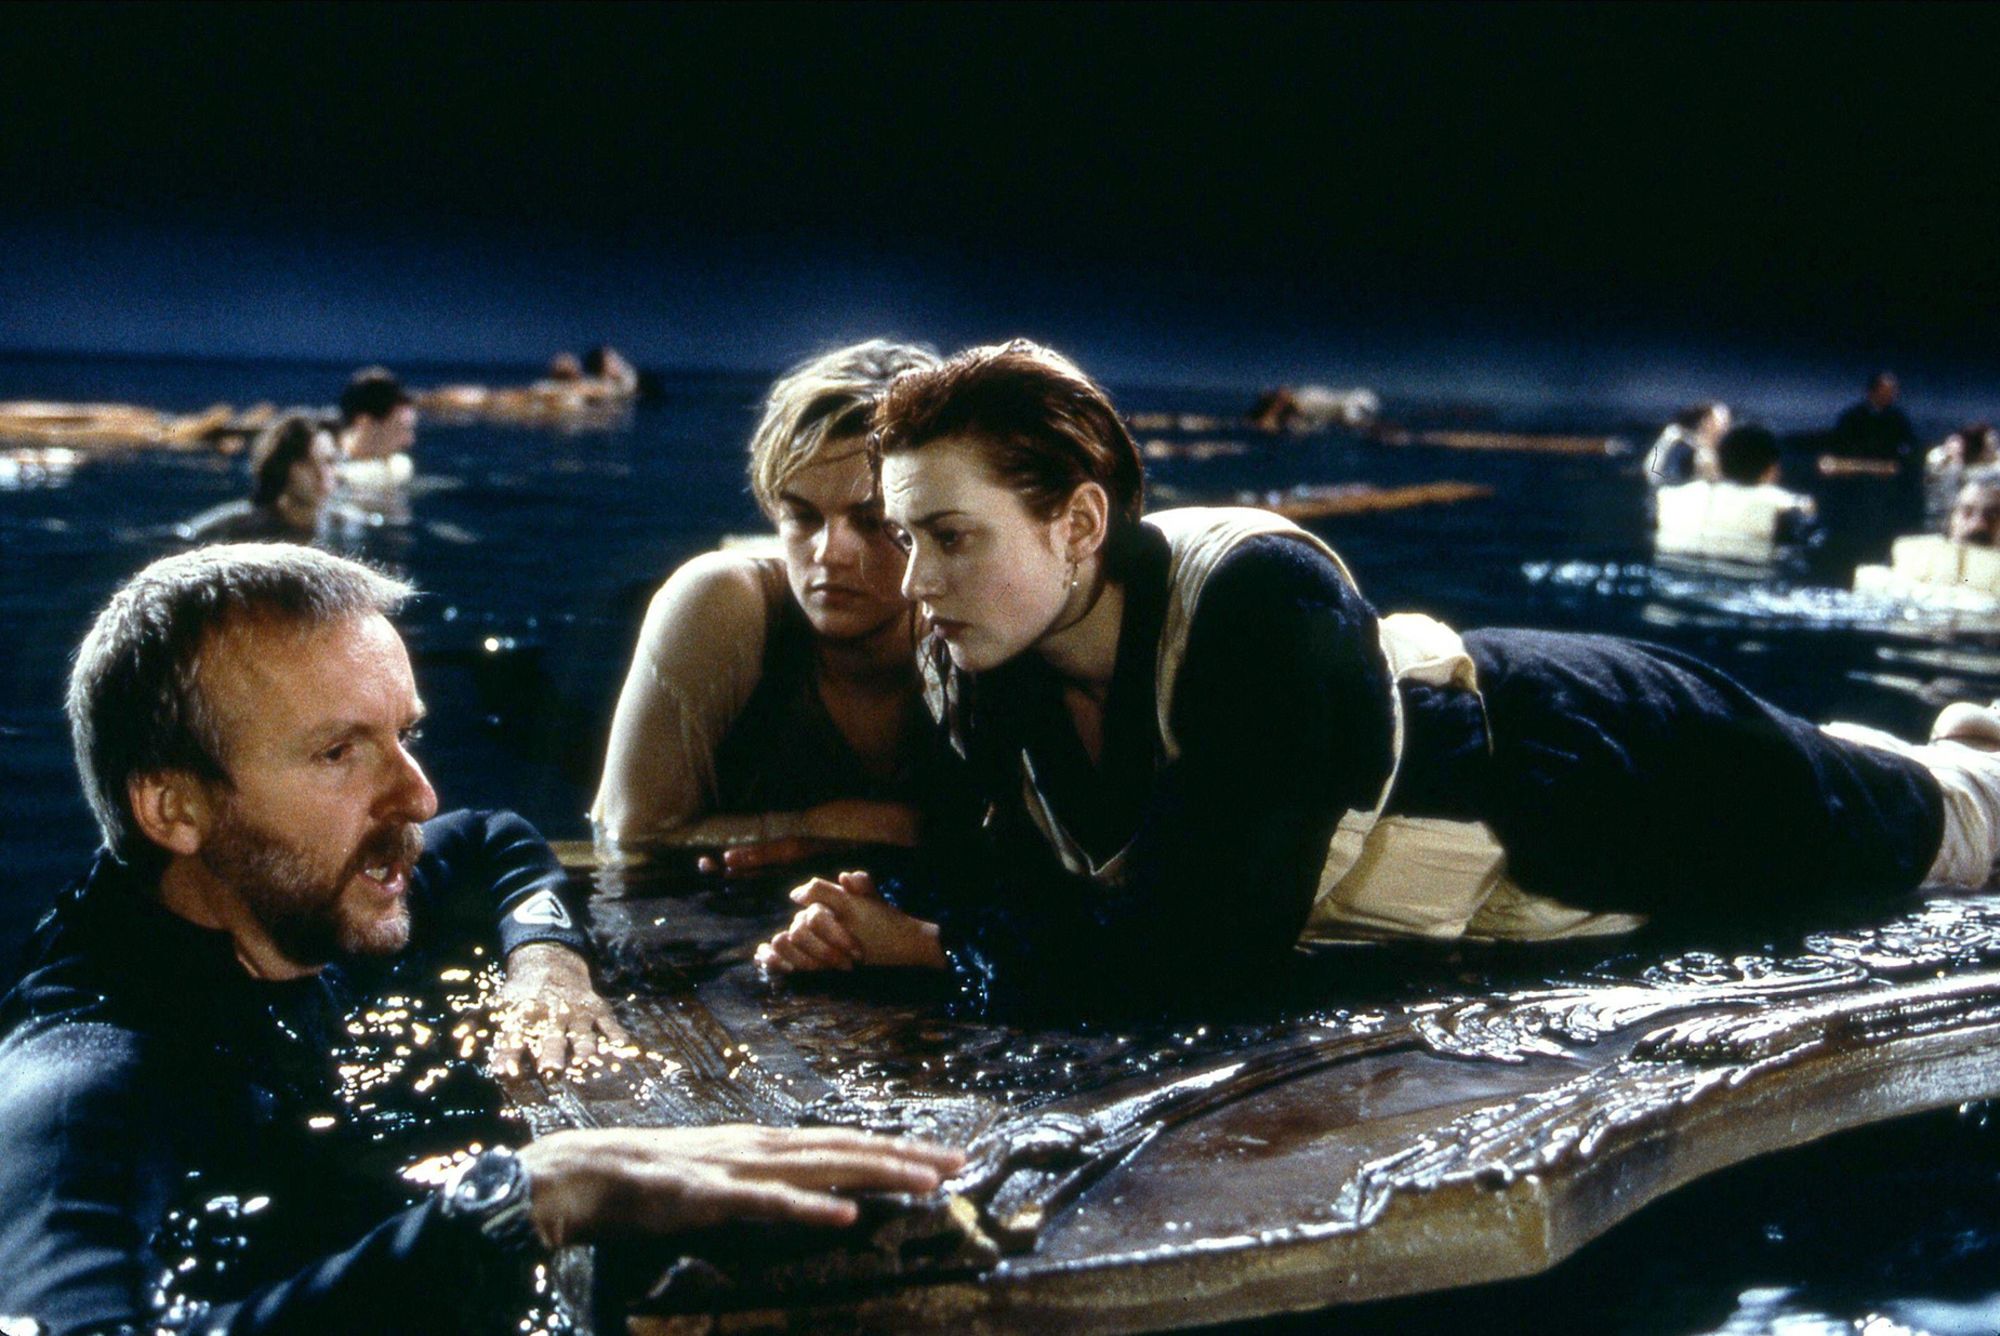 The floating wood panel that saved Rose DeWitt Bukater, but not Jack Dawson, in James Cameron's "Titanic" has sold for over $700,000 amongst other cinema memorabilia. Pictured above: Cameron directs Leonardo DiCaprio (Dawson) and Kate Winslet (DeWitt Bukater) on the fateful prop.